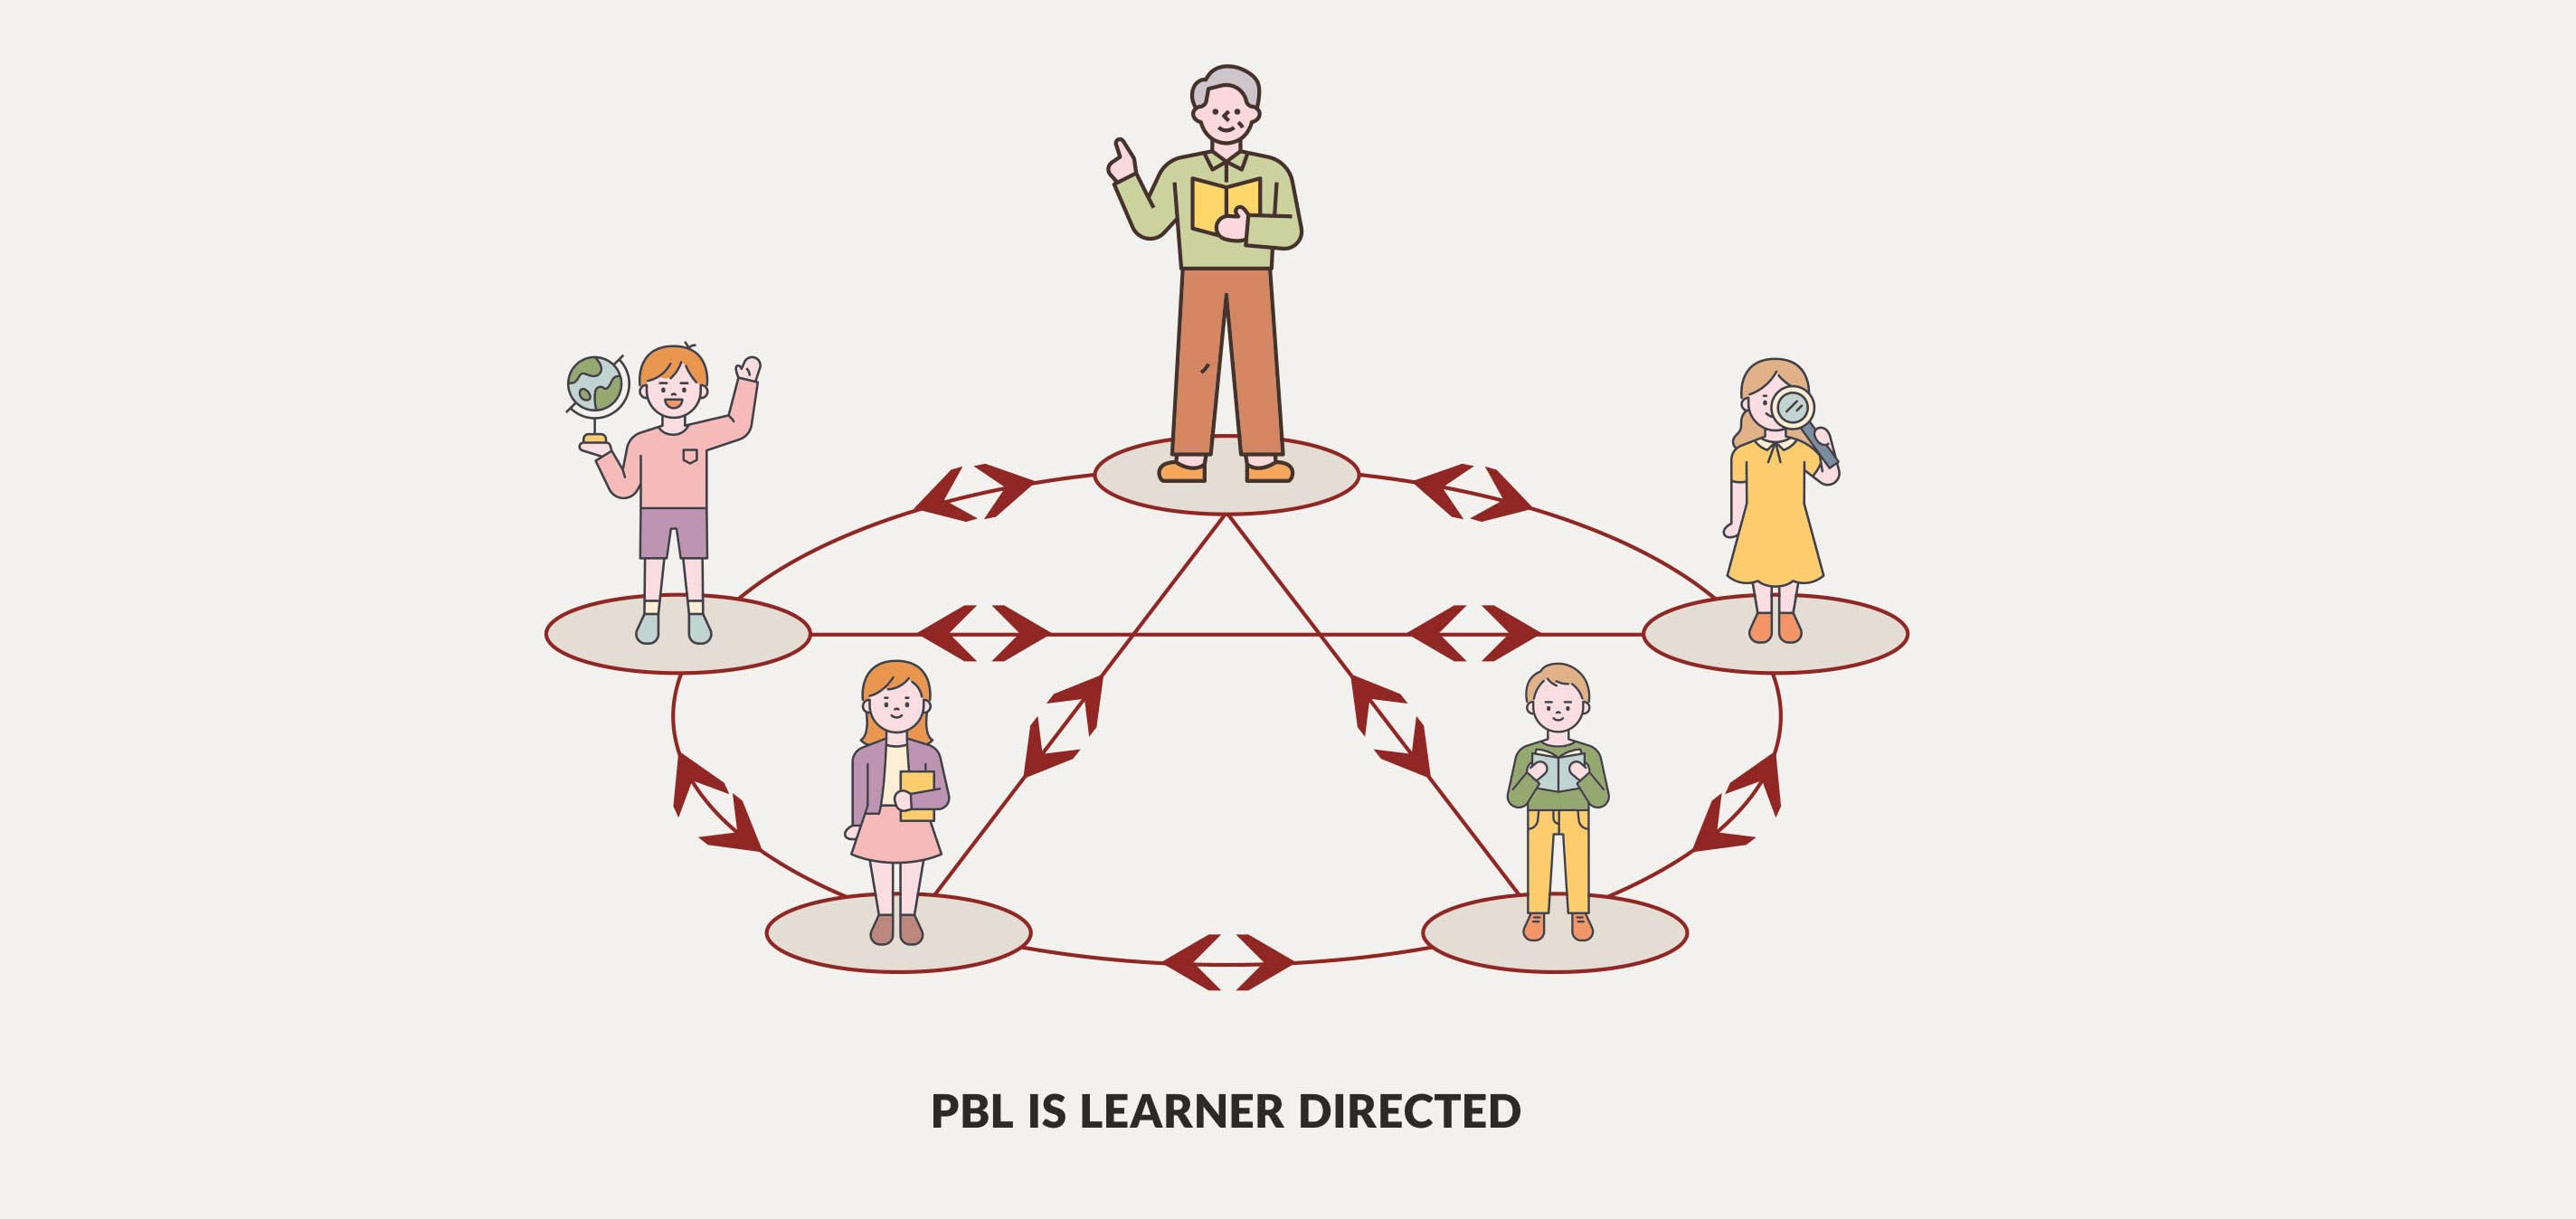 PBL is Learner Directed